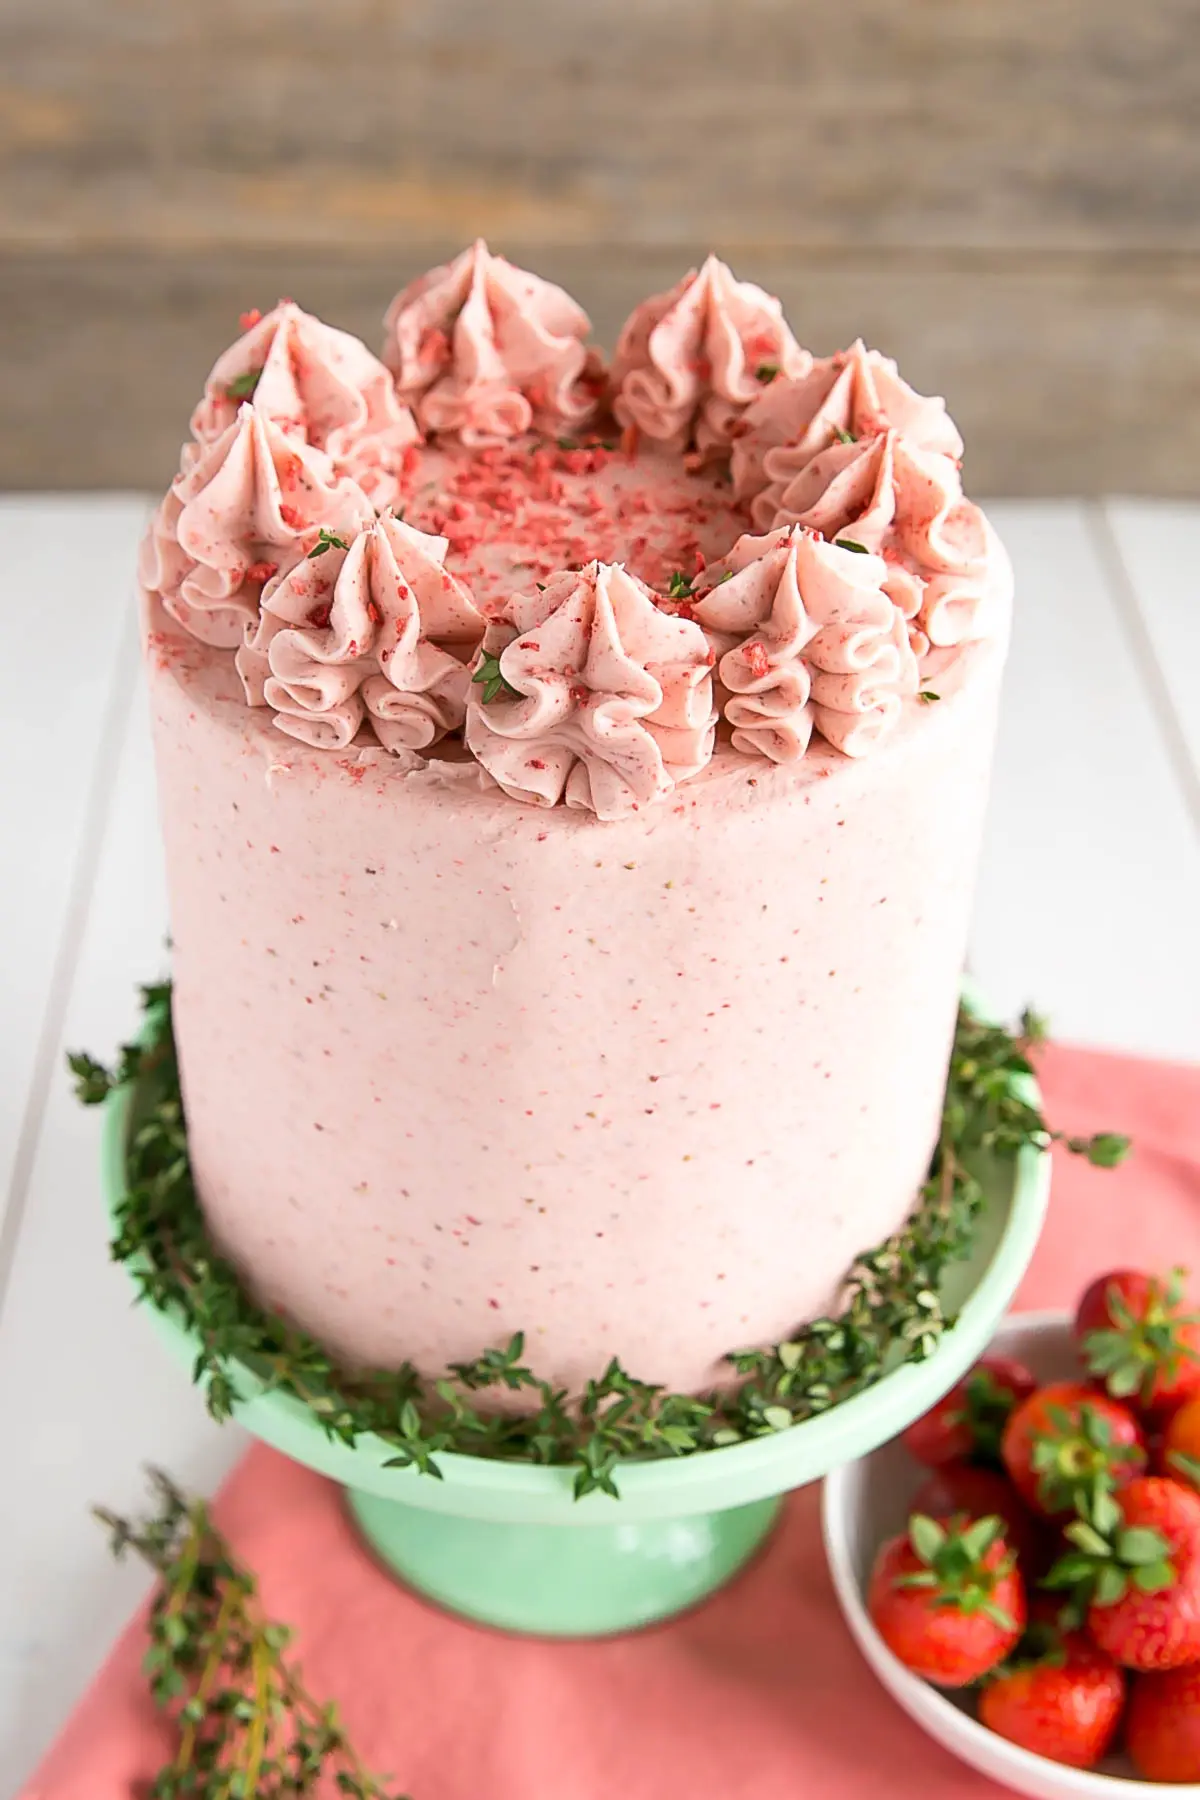 Strawberry cake made with freeze-dried strawberries.